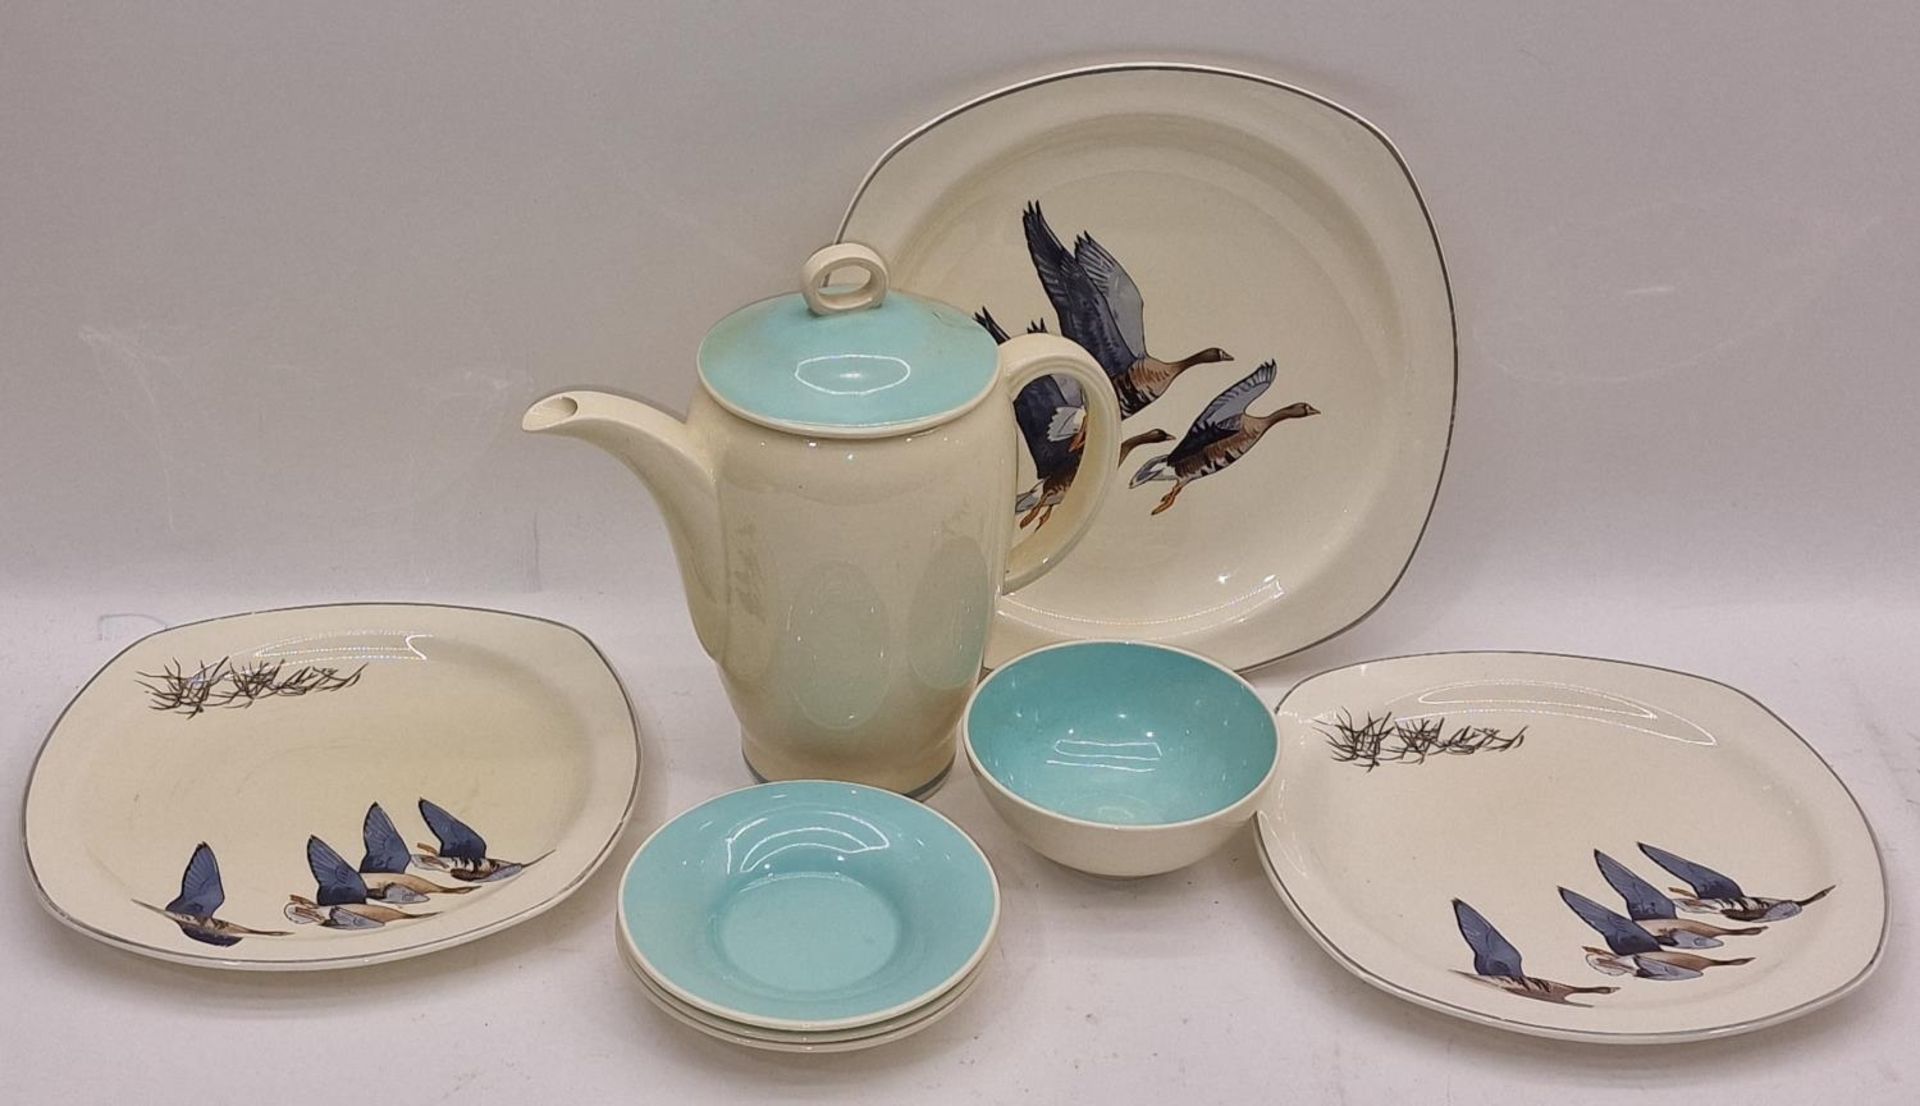 Midwinter Stylecraft Peter Scott "Wild Geese" three plates together with some pieces of Susie Cooper